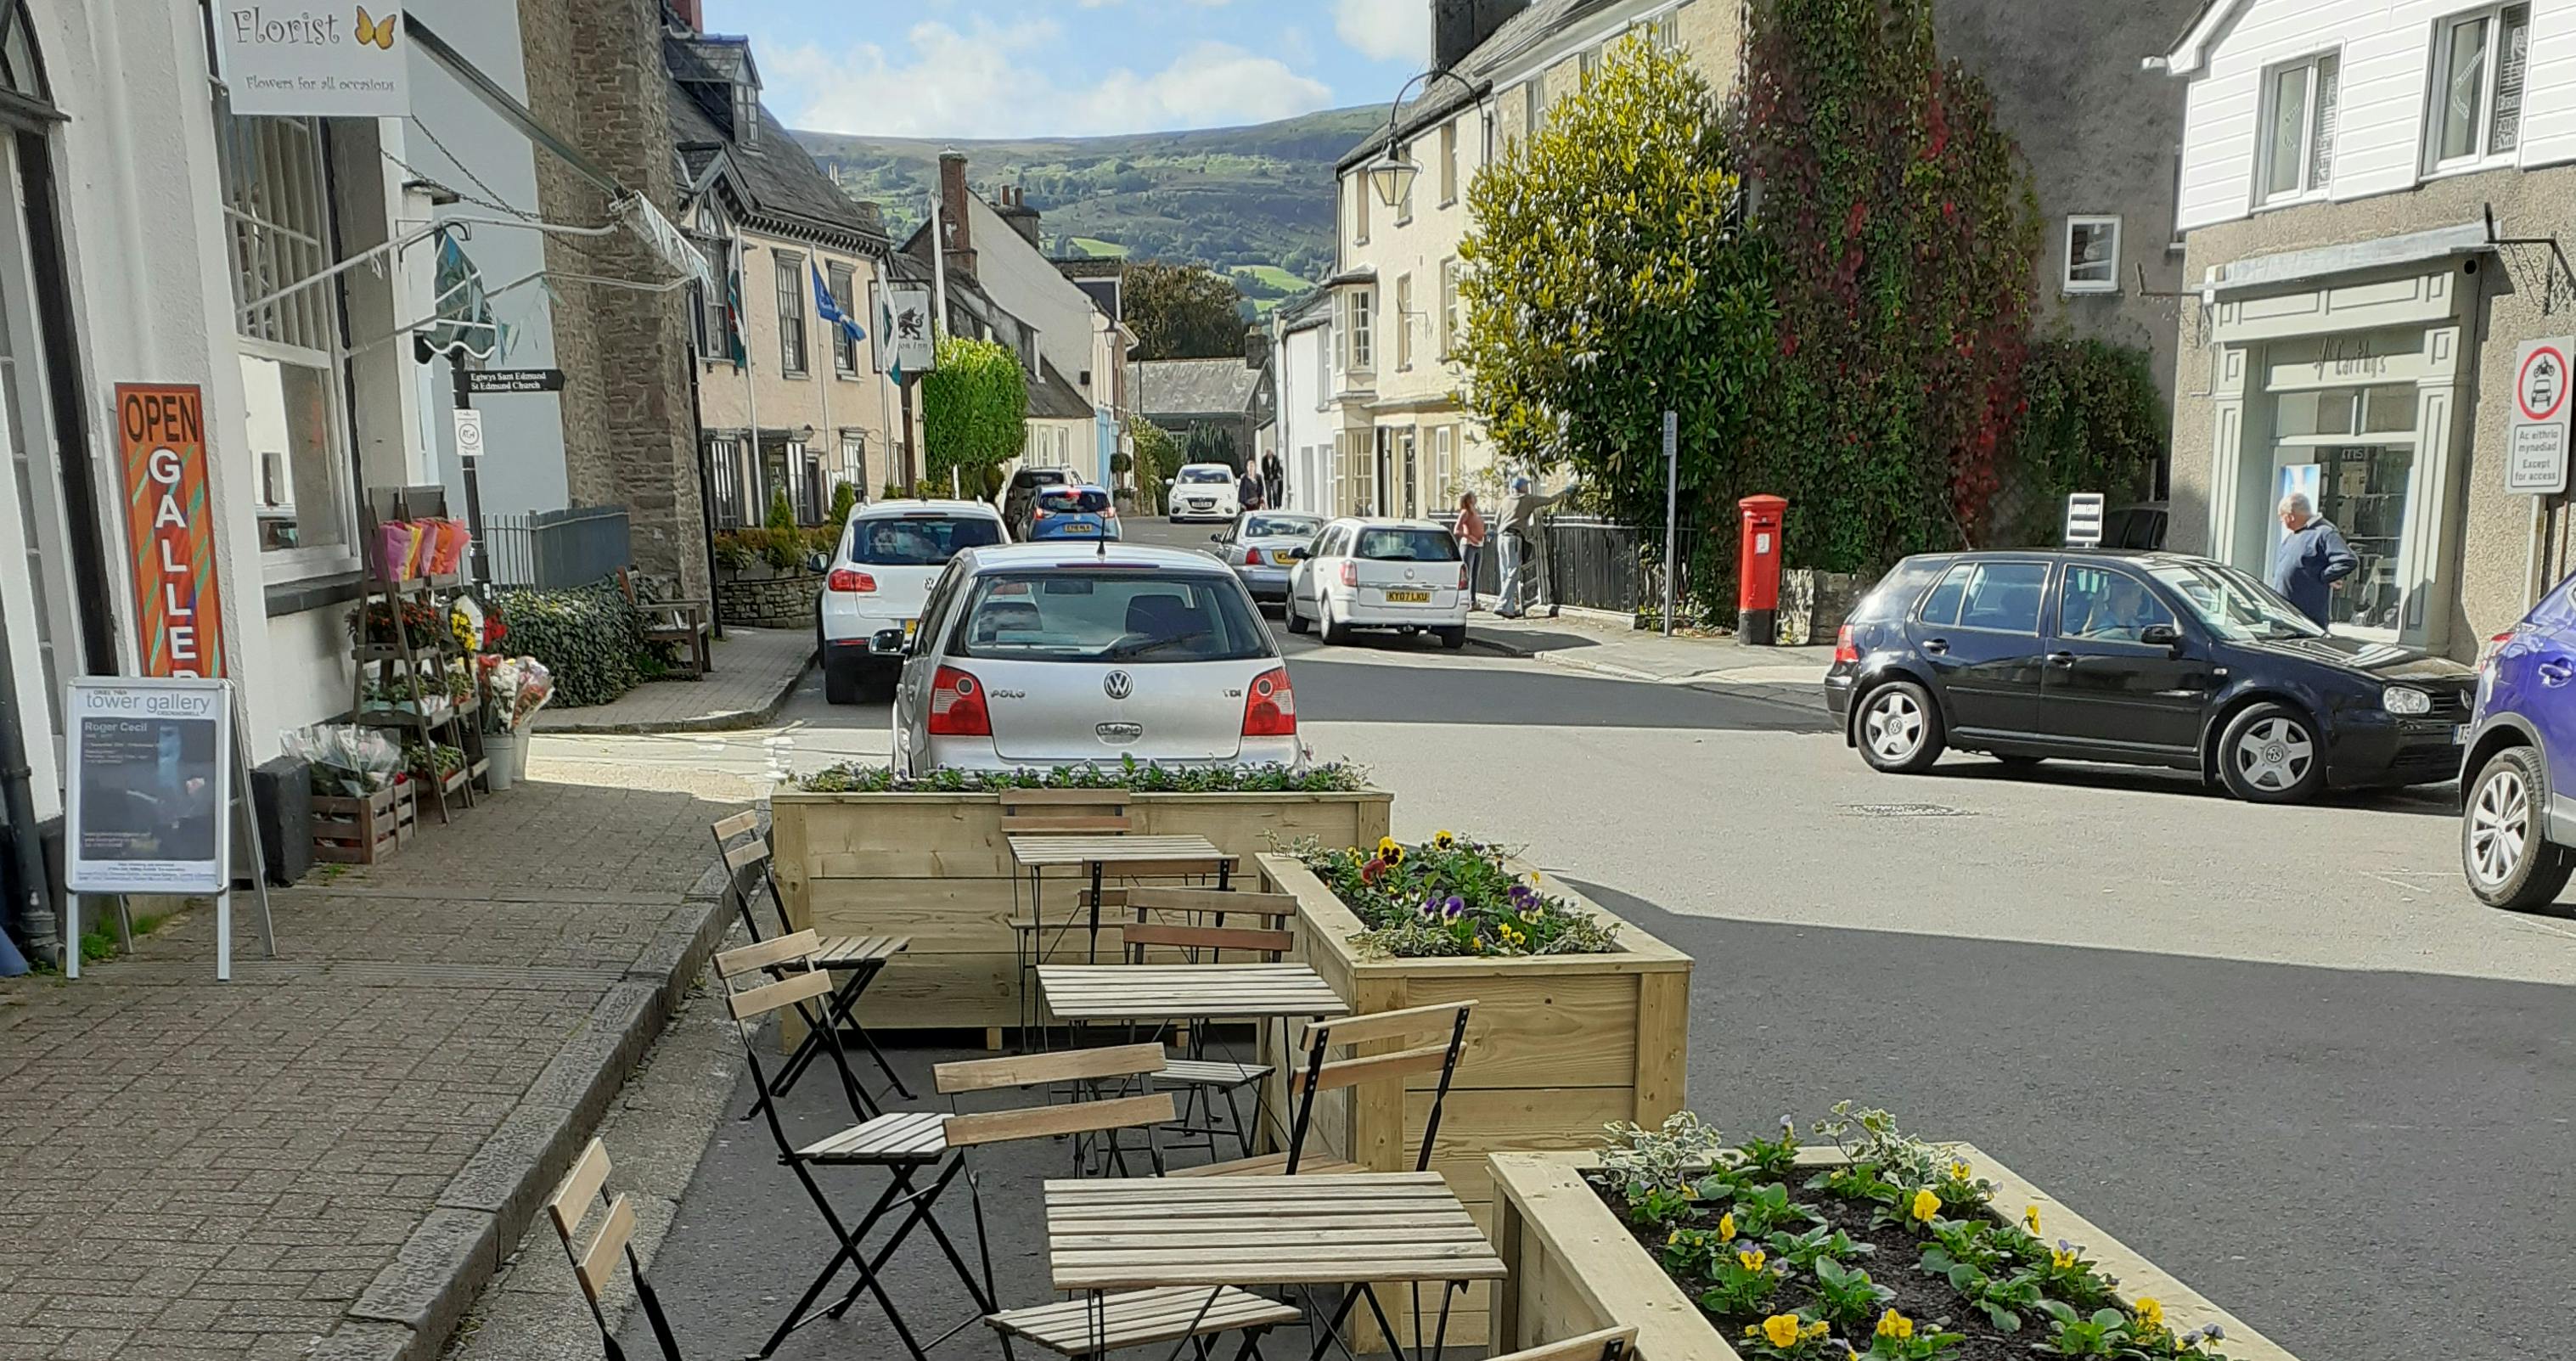 Image of table and chairs outside on the street surrounded by planters.